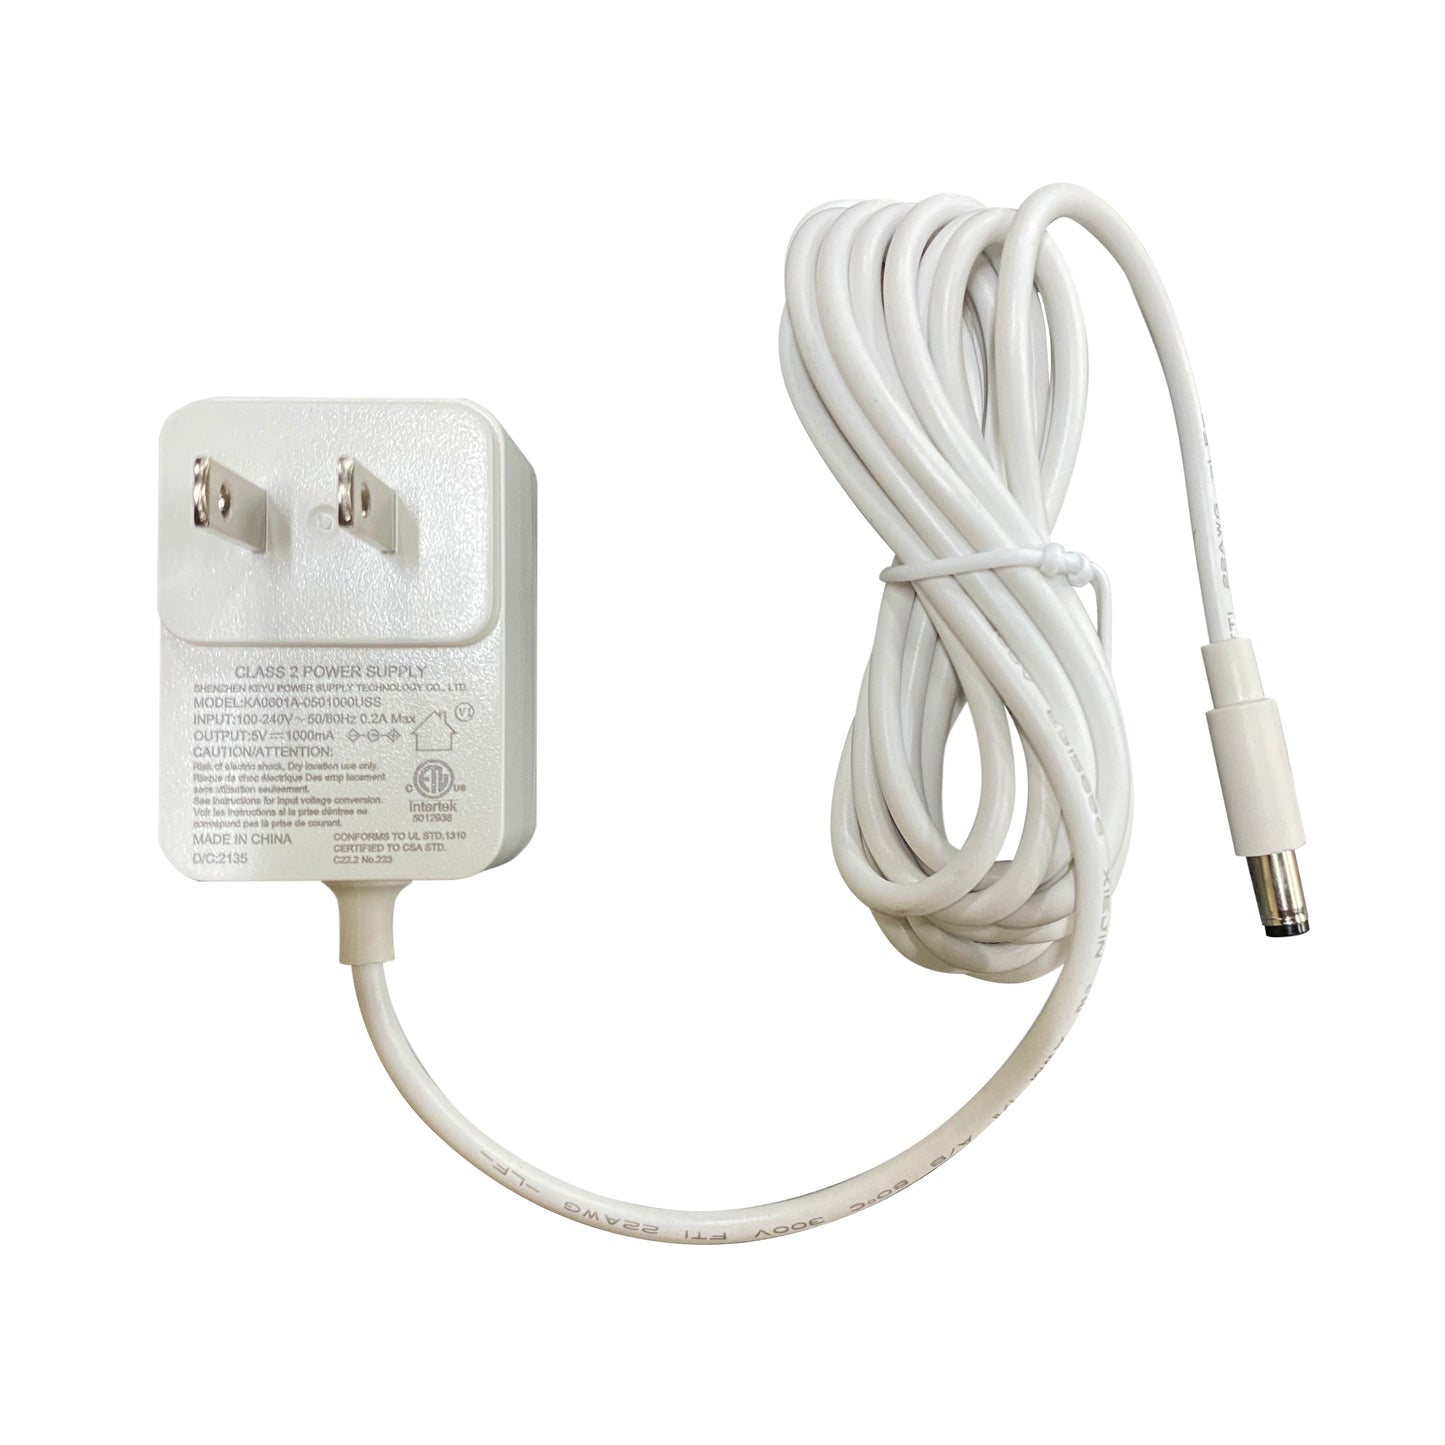 Replacement Power Cord for Nova Baby Swing